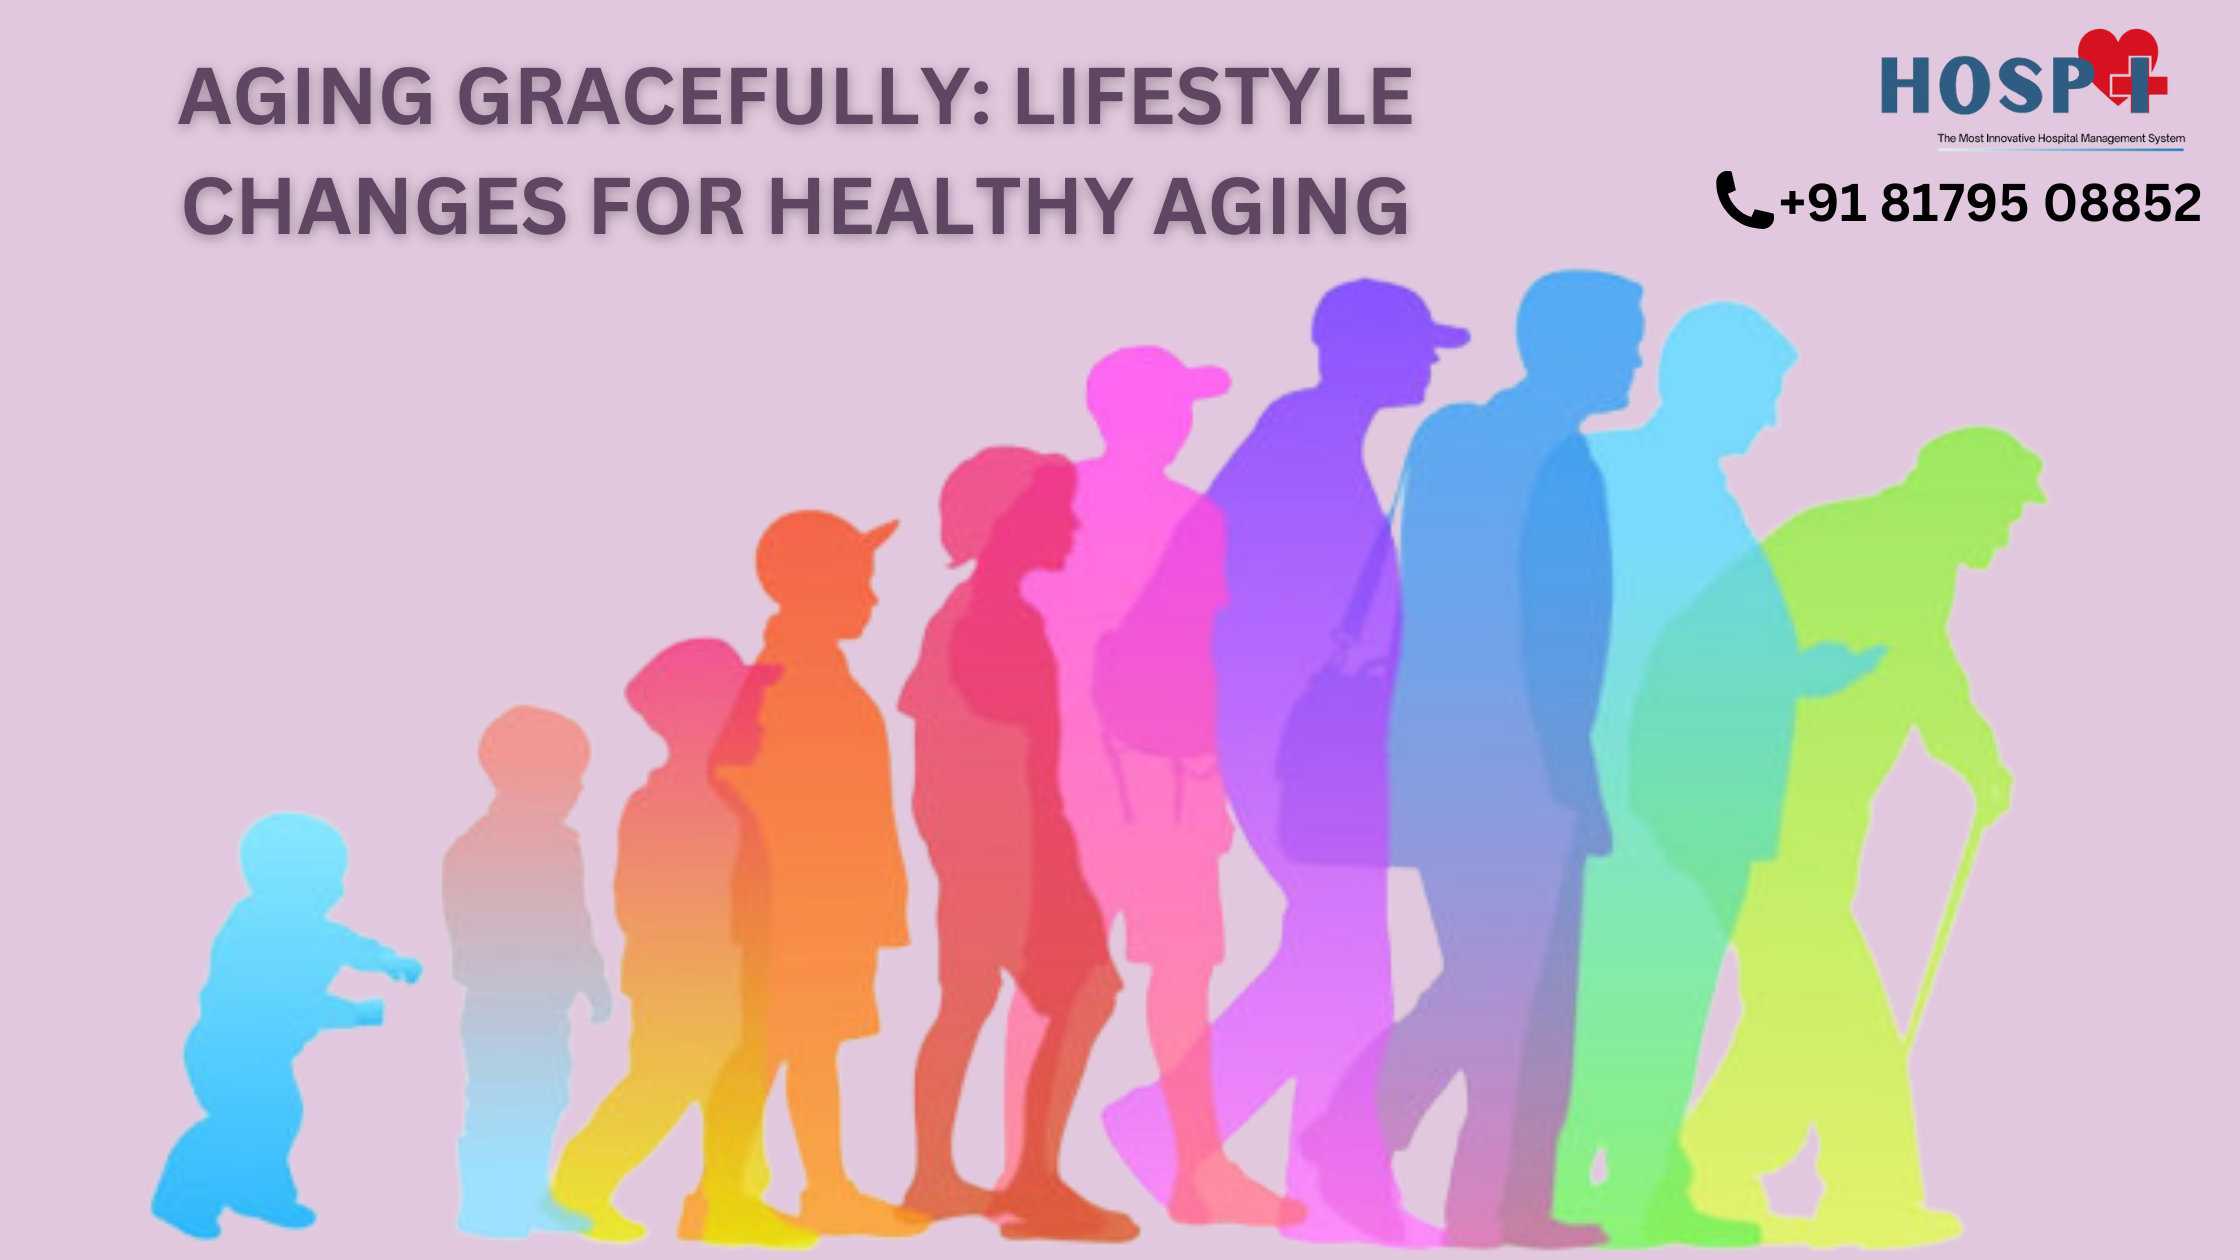 Aging Gracefully: Lifestyle Changes for Healthy Aging